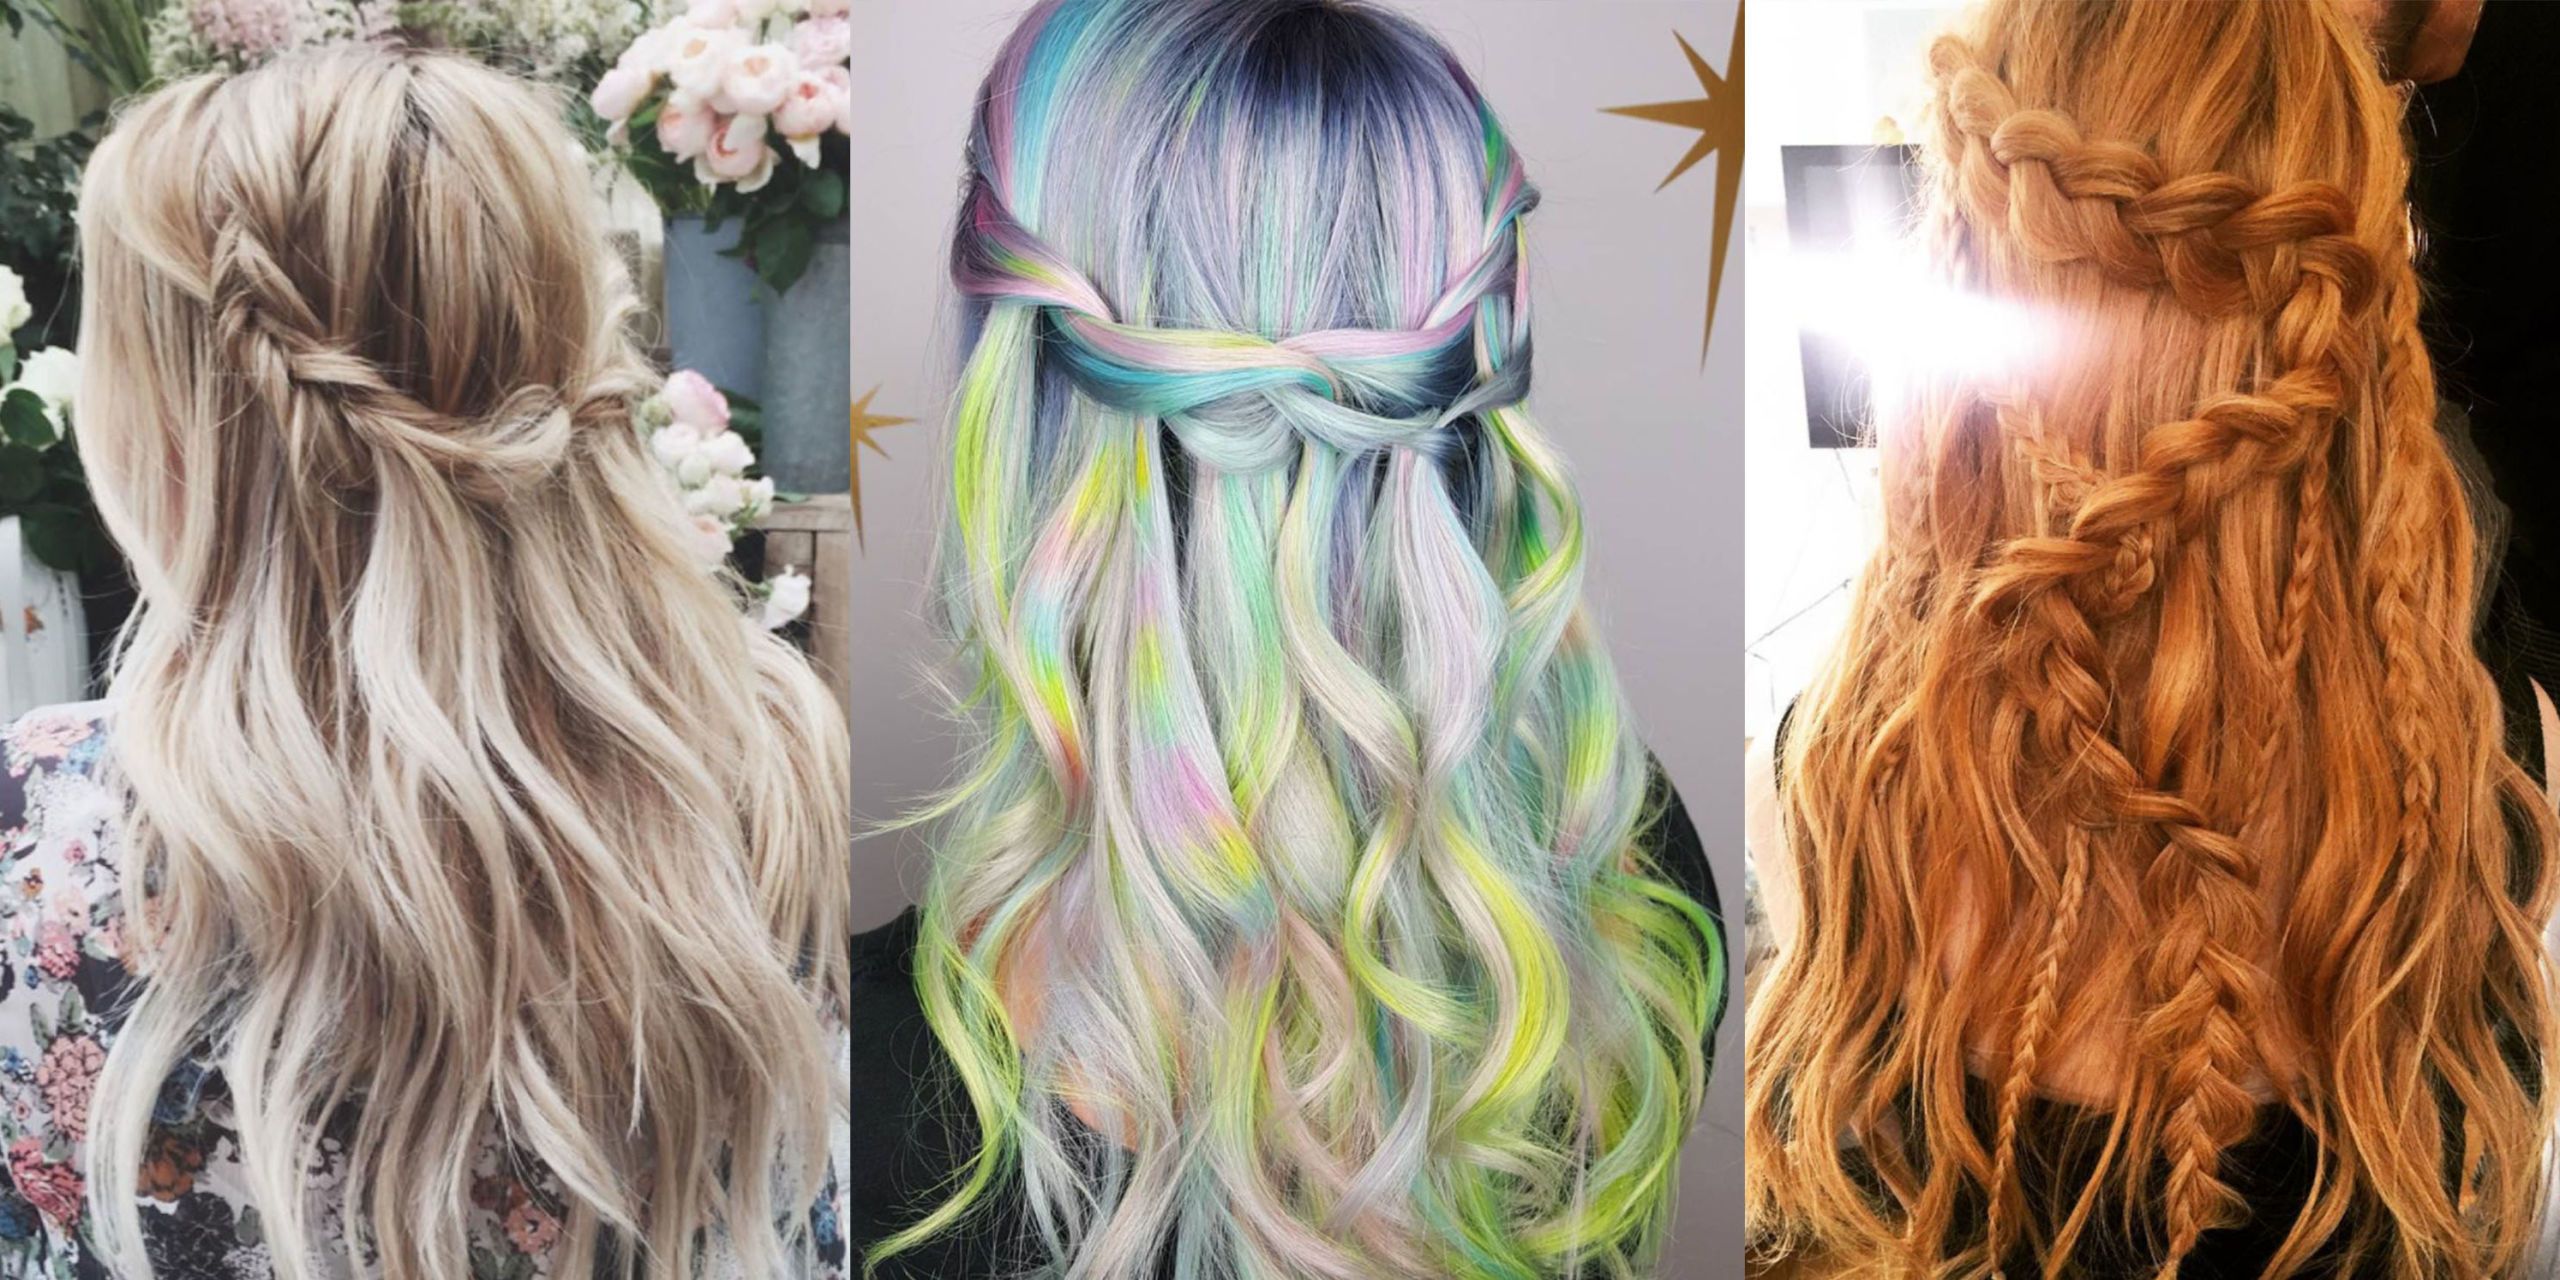 Waterfall Hairstyles Ideas 15 Different Types of Waterfall Braids